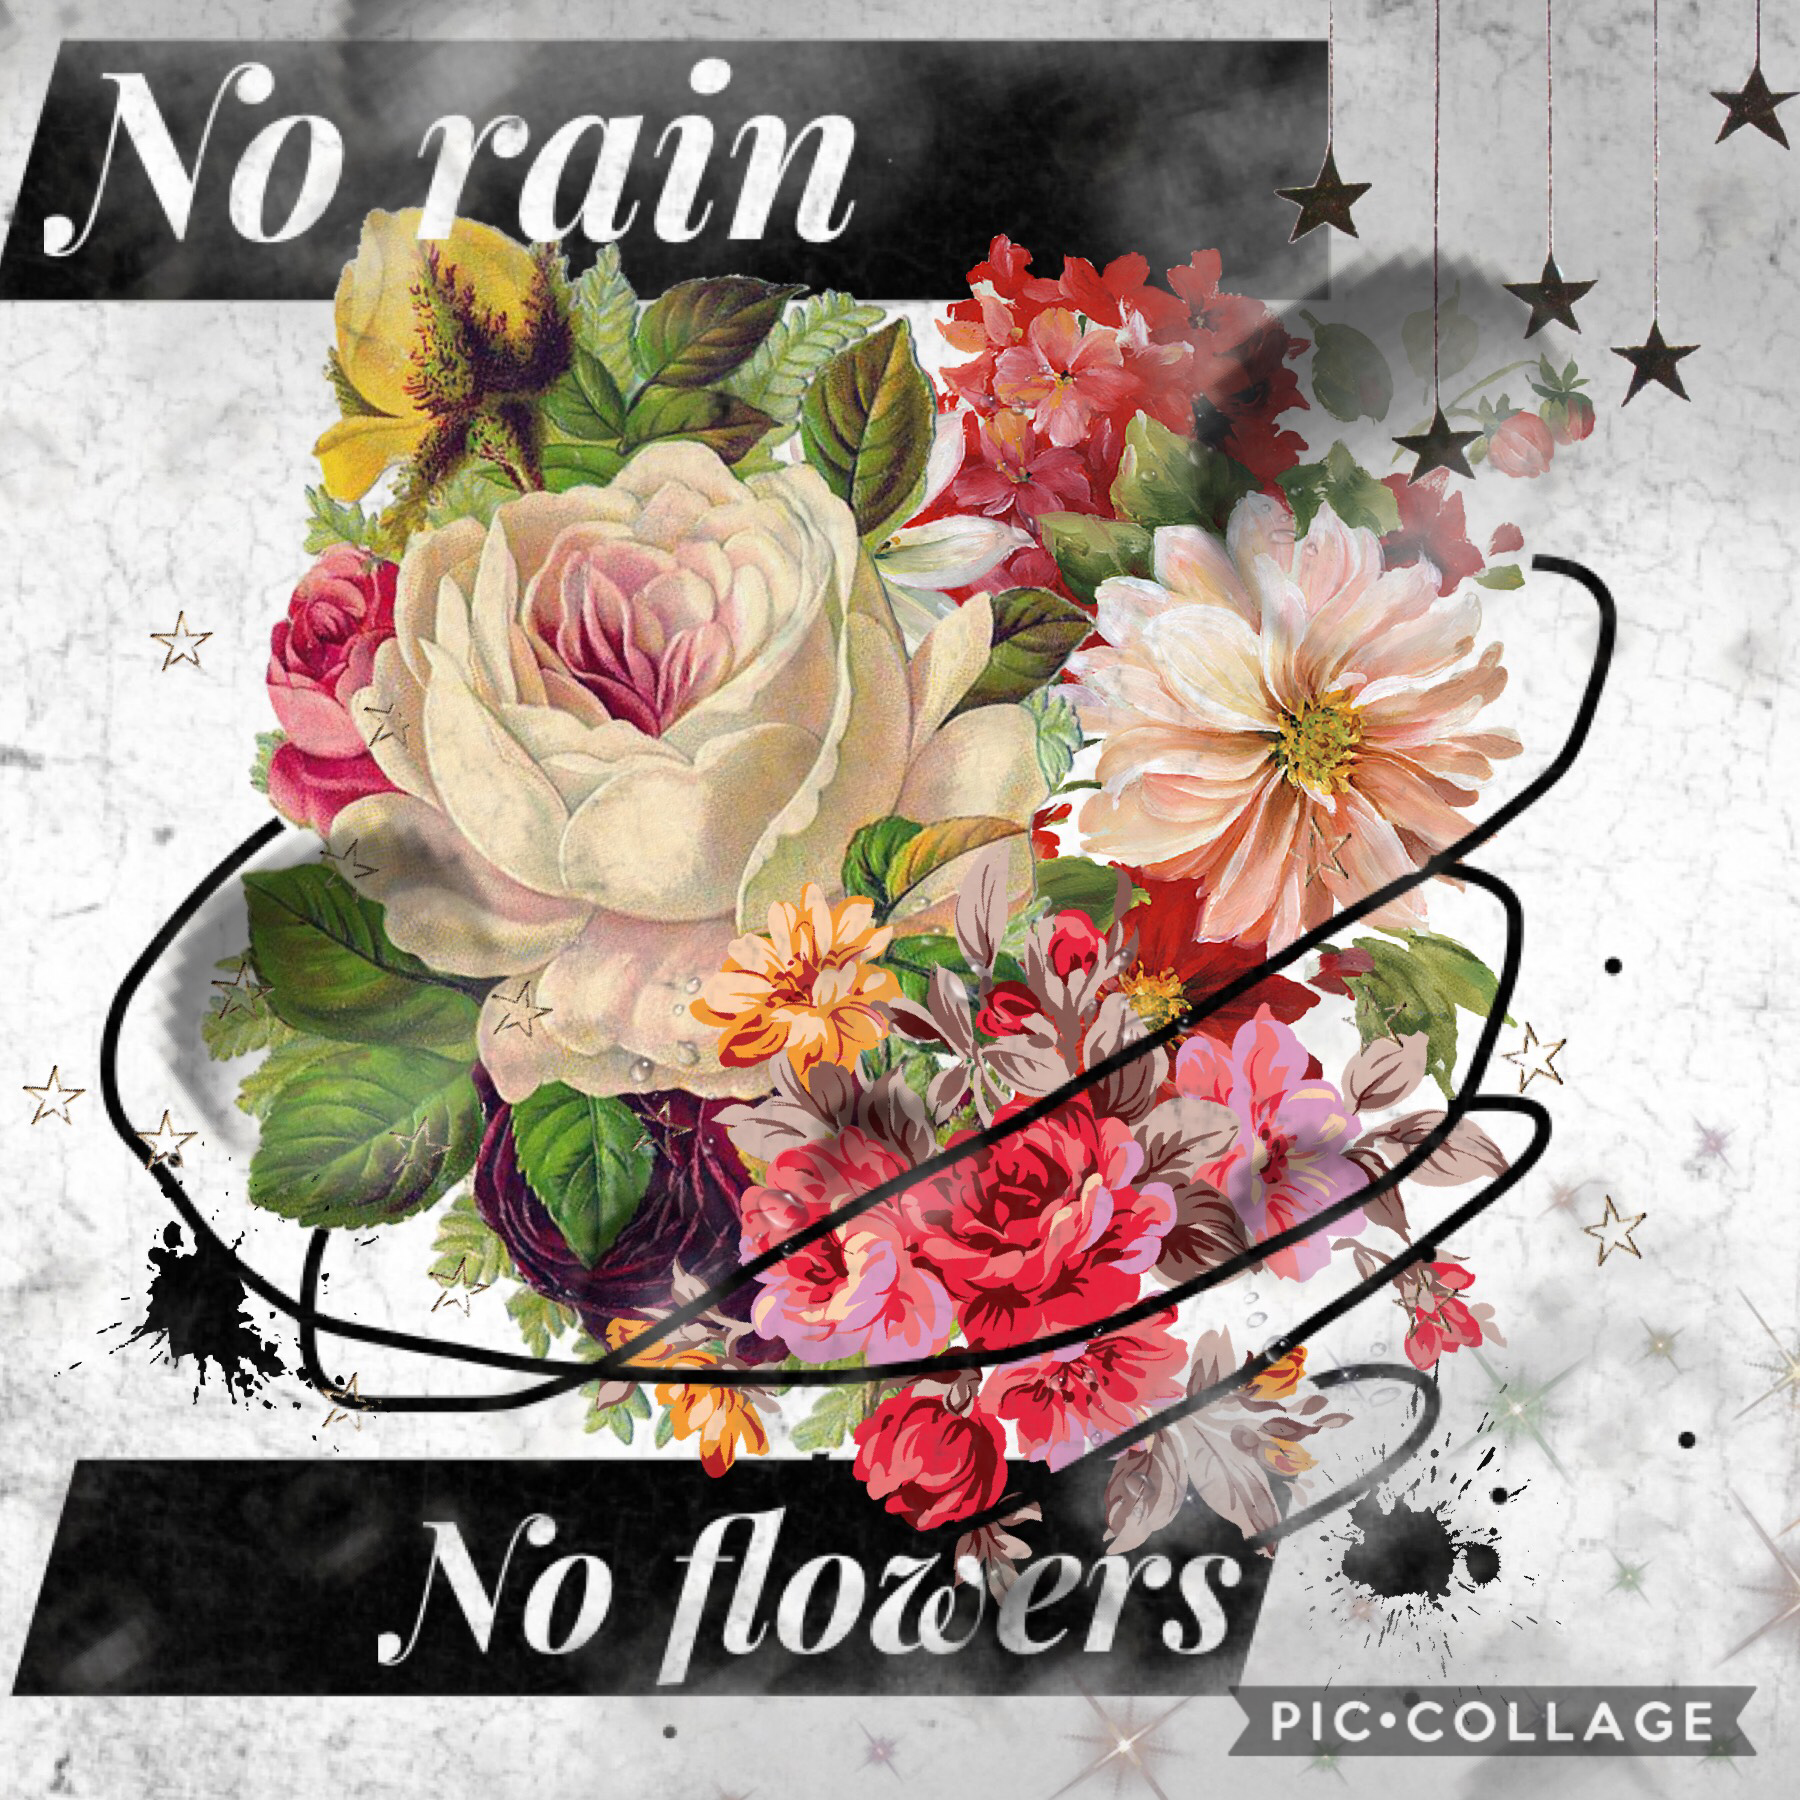 💐☔️No rain, no flowers☔️💐
I hope you guys like this one it’s a bit different from my normal stuff :)